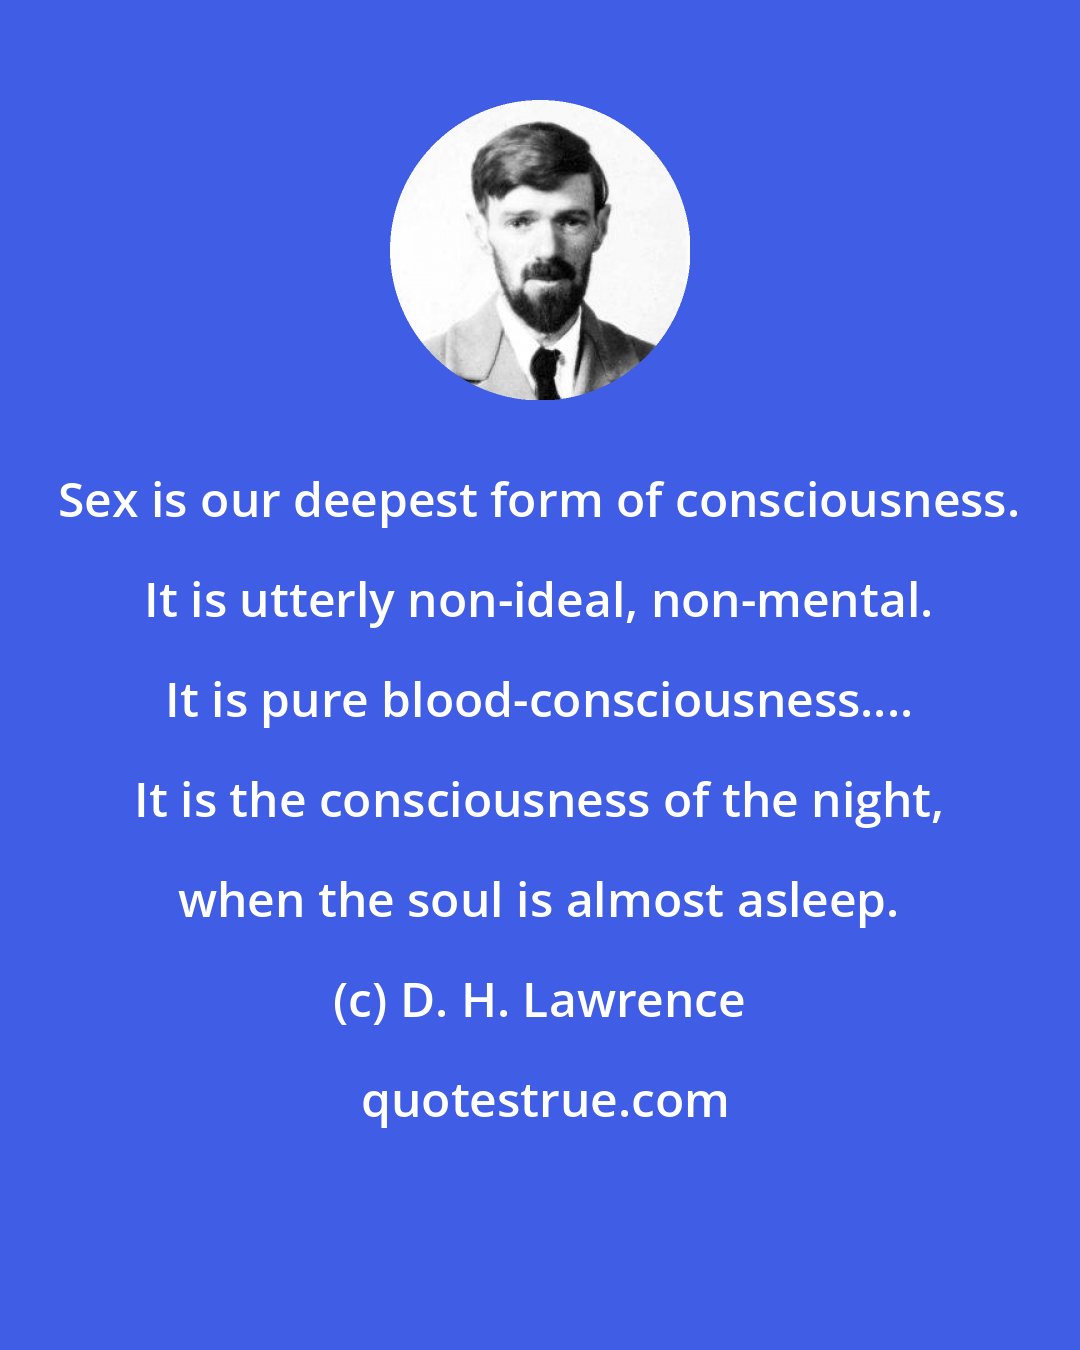 D. H. Lawrence: Sex is our deepest form of consciousness. It is utterly non-ideal, non-mental. It is pure blood-consciousness.... It is the consciousness of the night, when the soul is almost asleep.